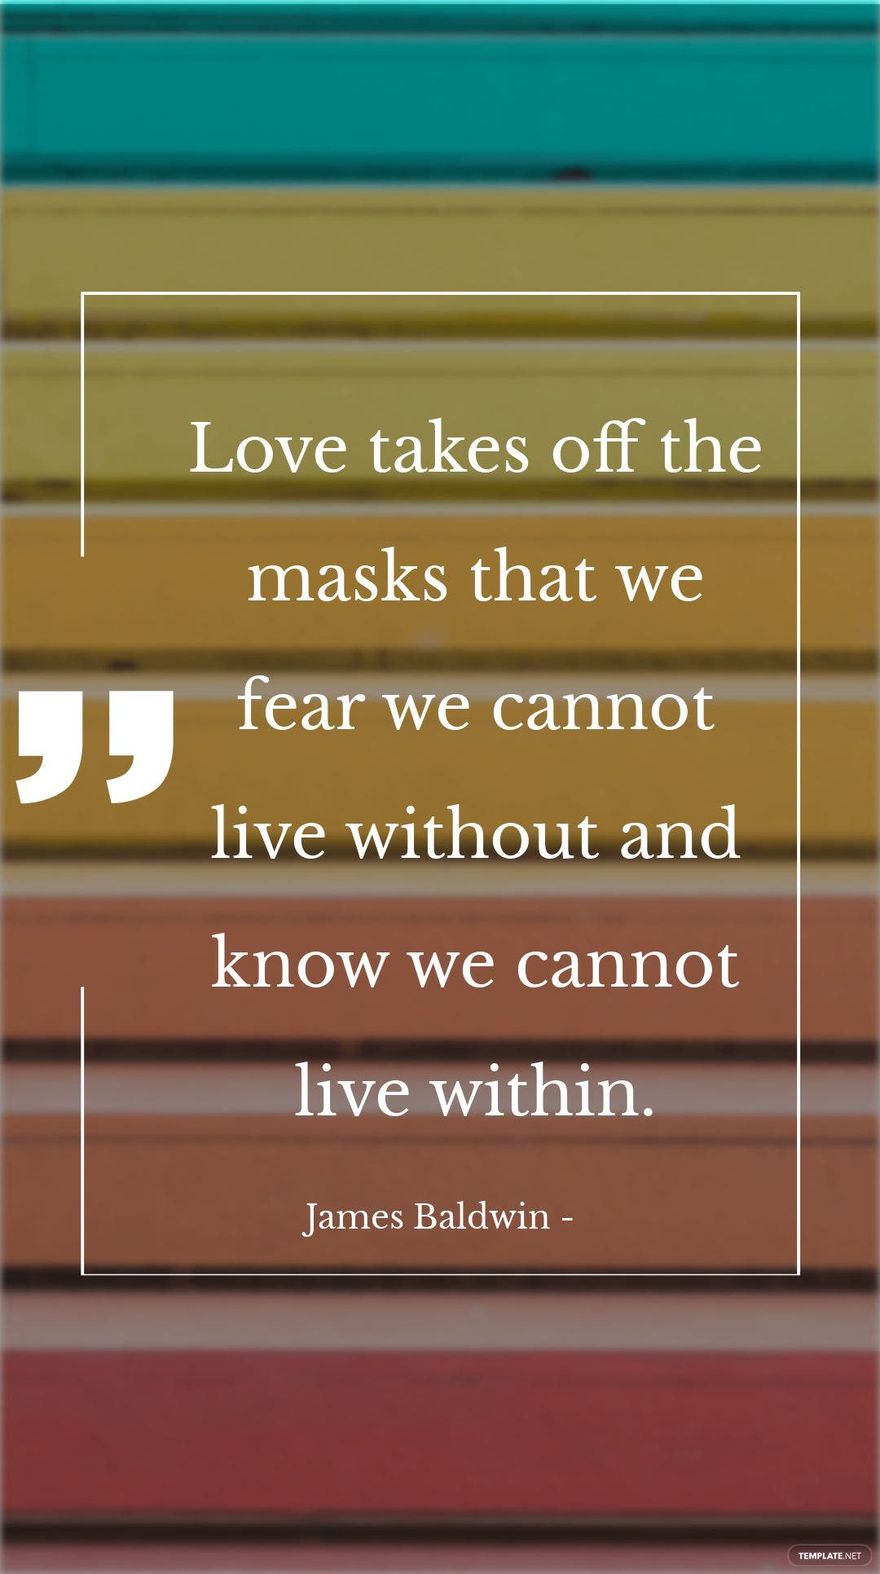 James Baldwin - Love takes off the masks that we fear we cannot live without and know we cannot live within.